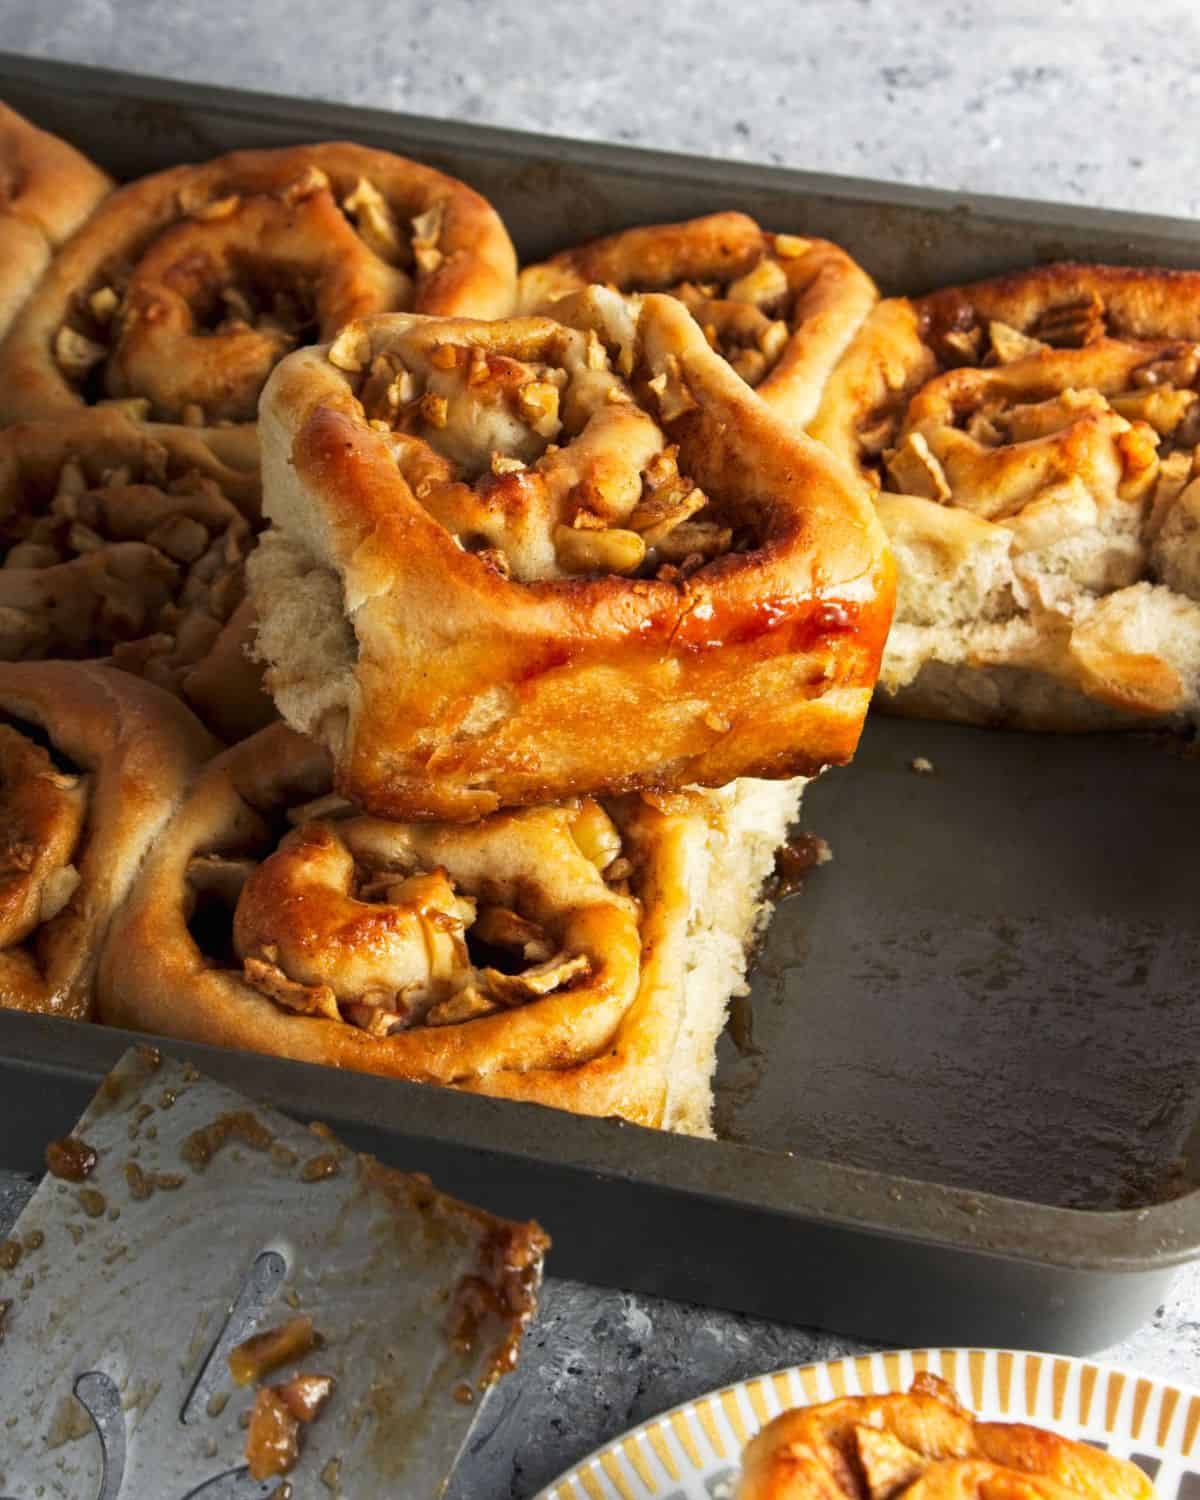 Apple sticky bun with walnuts on top of a baking sheet